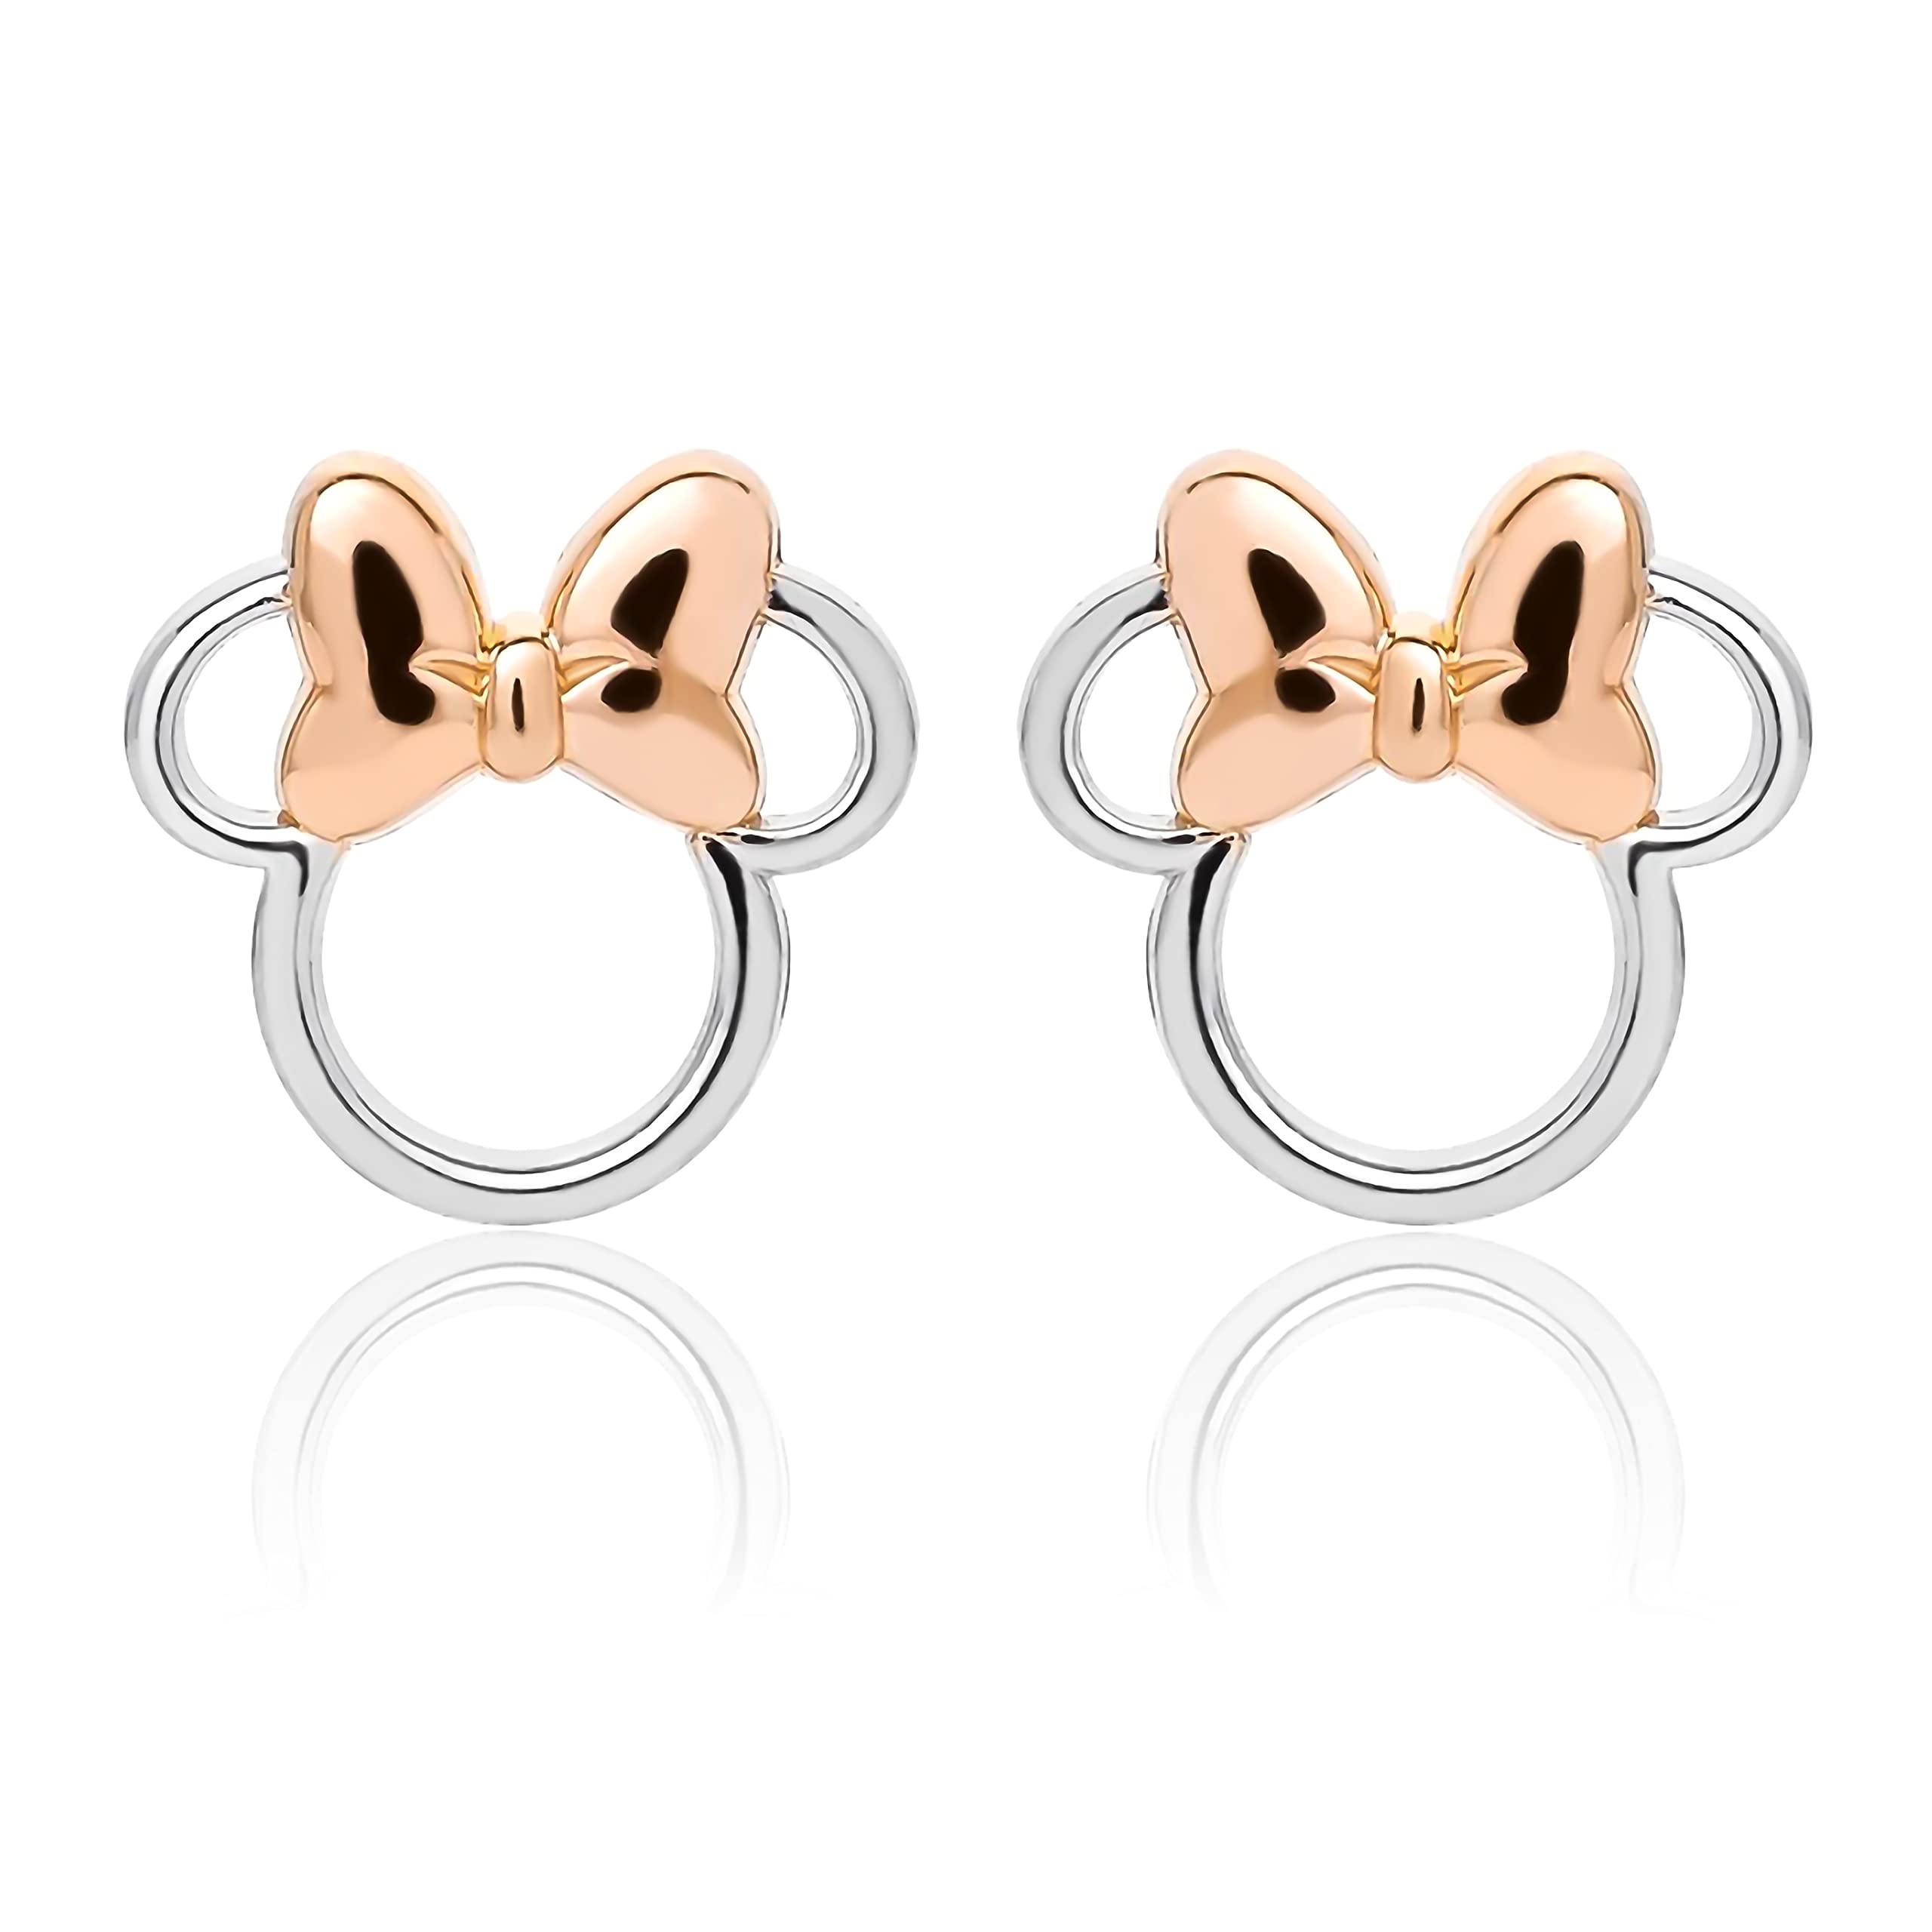 Disney Minnie Mouse Stud Earrings, Two Tone Minnie Silhouette, Sterling Silver